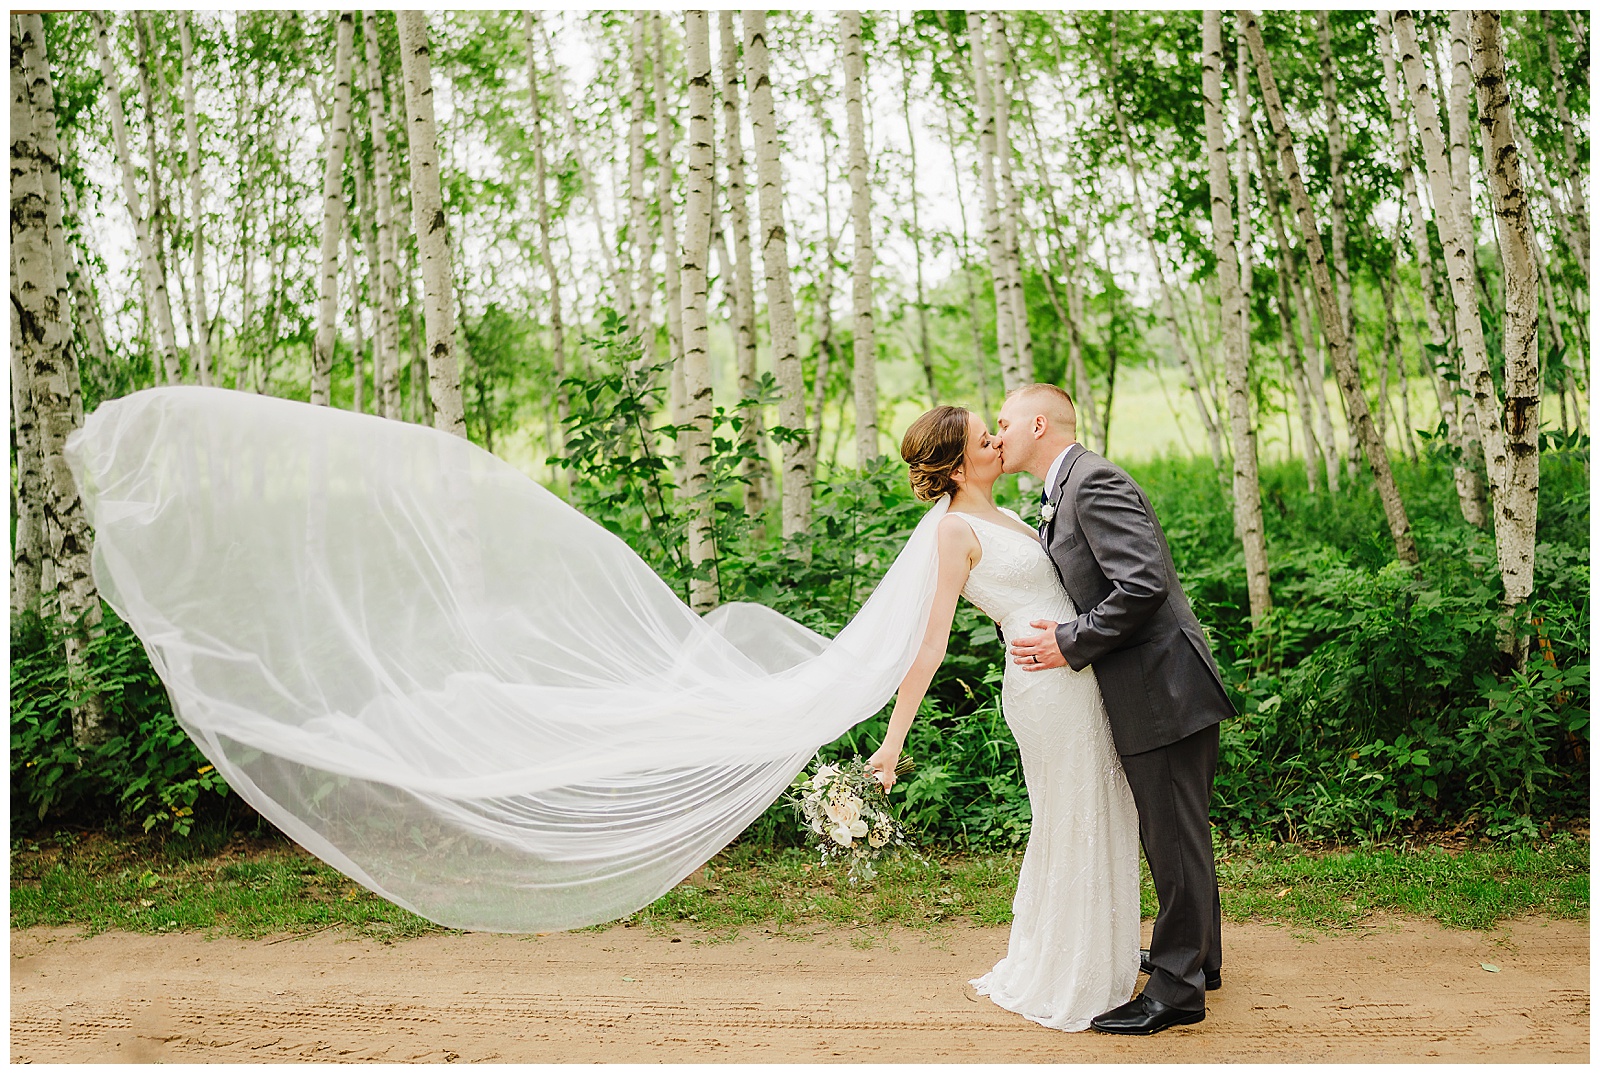 Bride and groom share a kiss while her veil blows in the summer breeze on their wedding day. Chippewa Valley wedding Fall wedding Fall colors #dixonappleorchard #orchardweddingvenue #outdoorwedding #appleorchardwedding #wisconsinweddingvenue